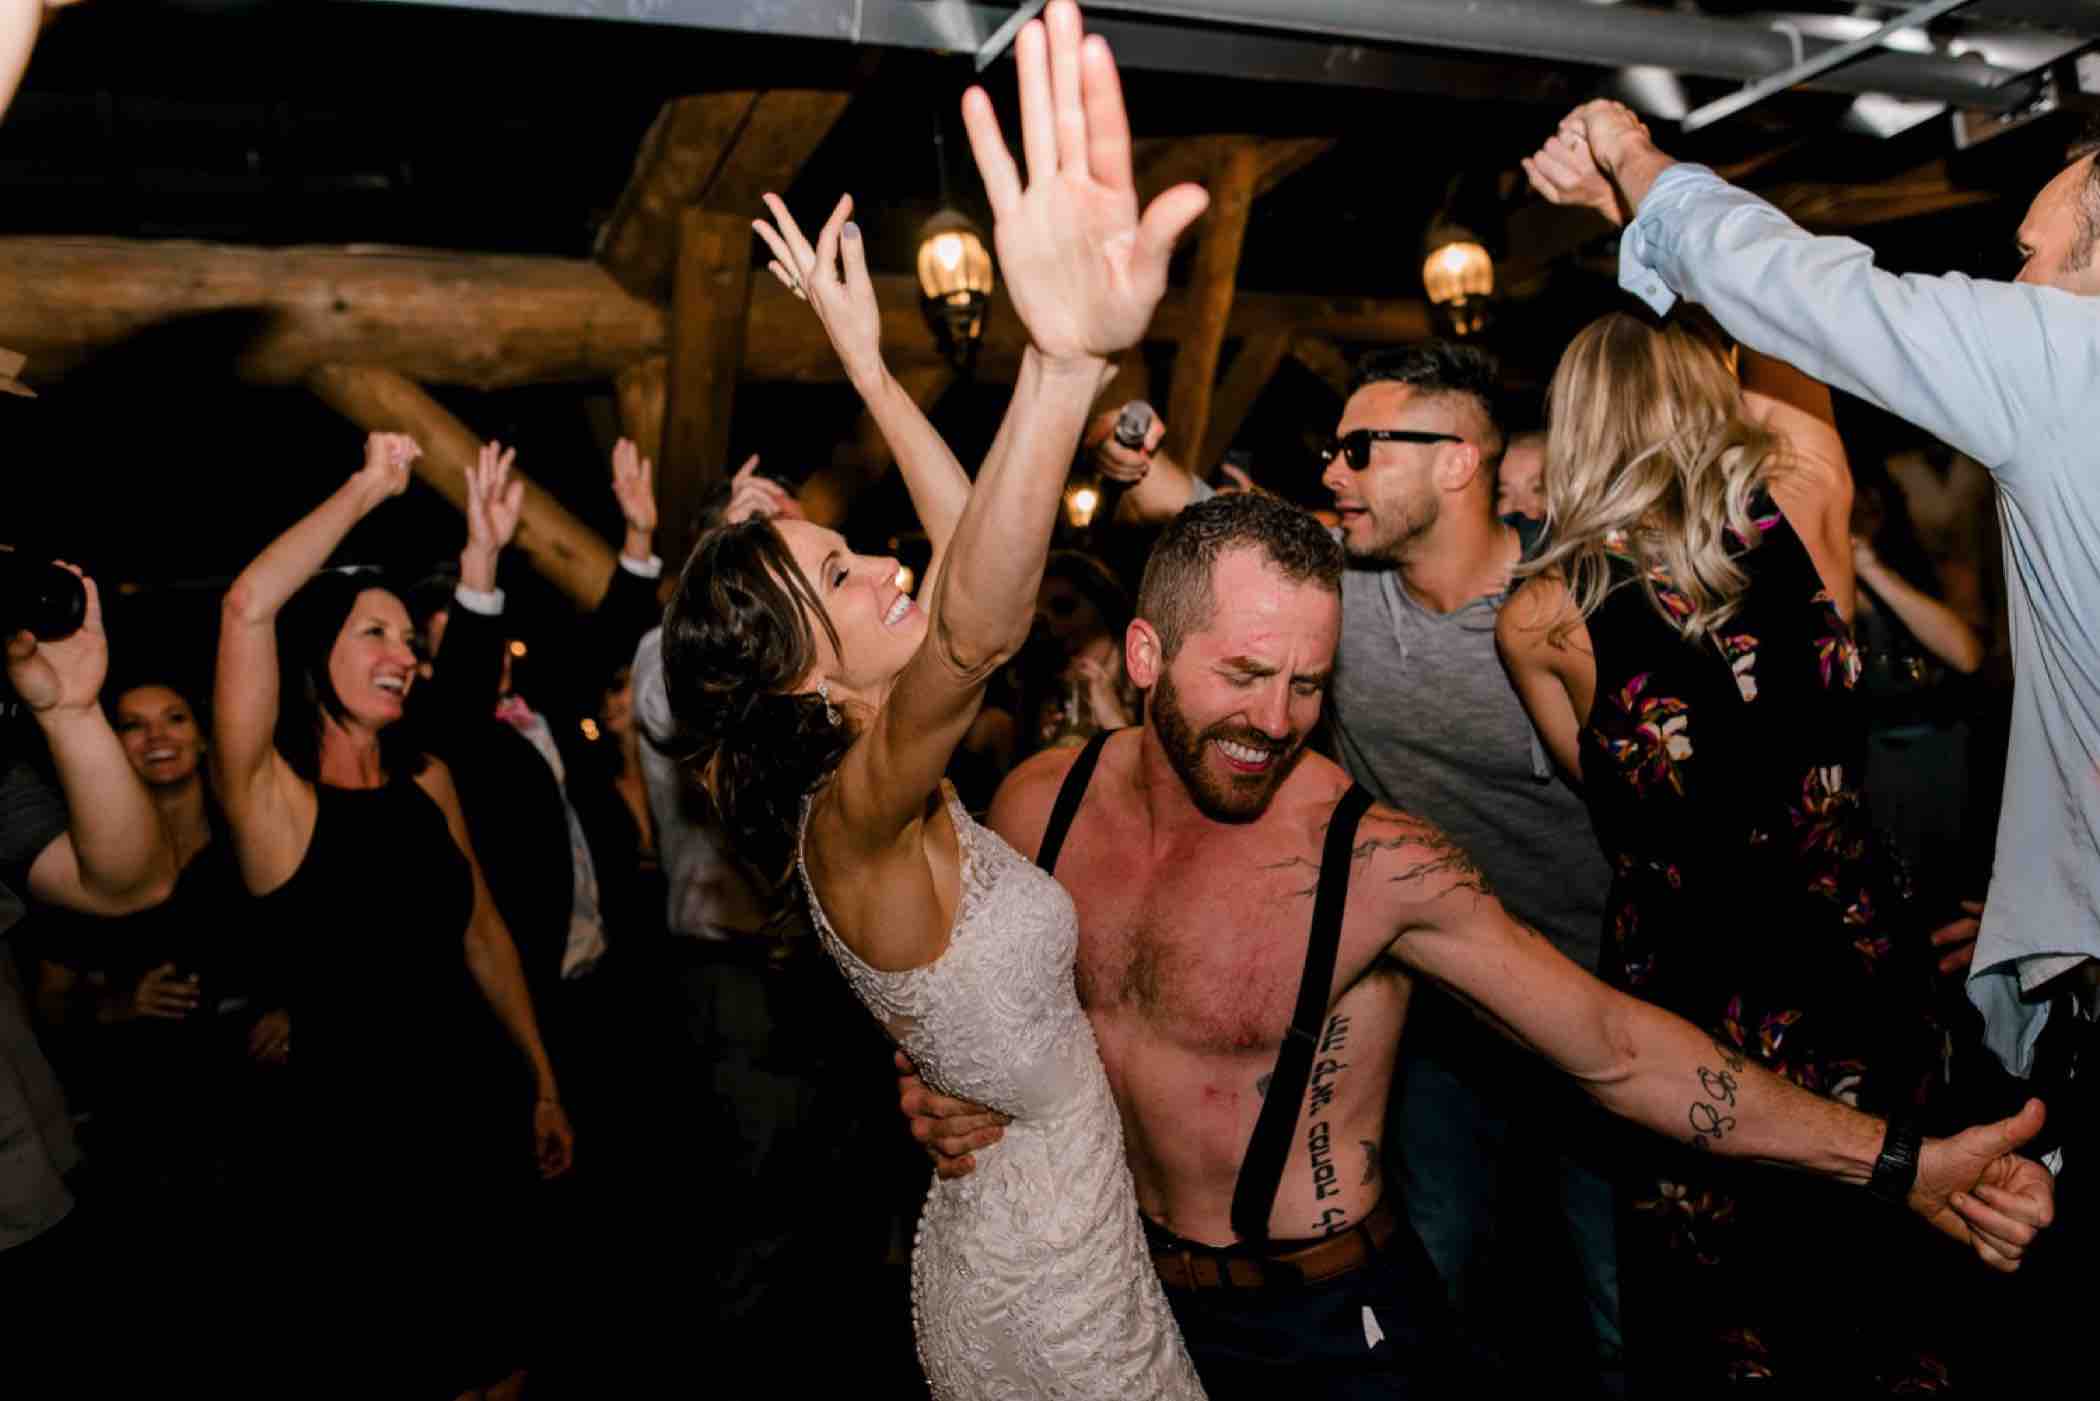 The bride and groom dance during their reception at Piney River Ranch in Vail, Colorado. Photo by Ali and Garrett, Romantic, Adventurous, Nostalgic Wedding Photographers.